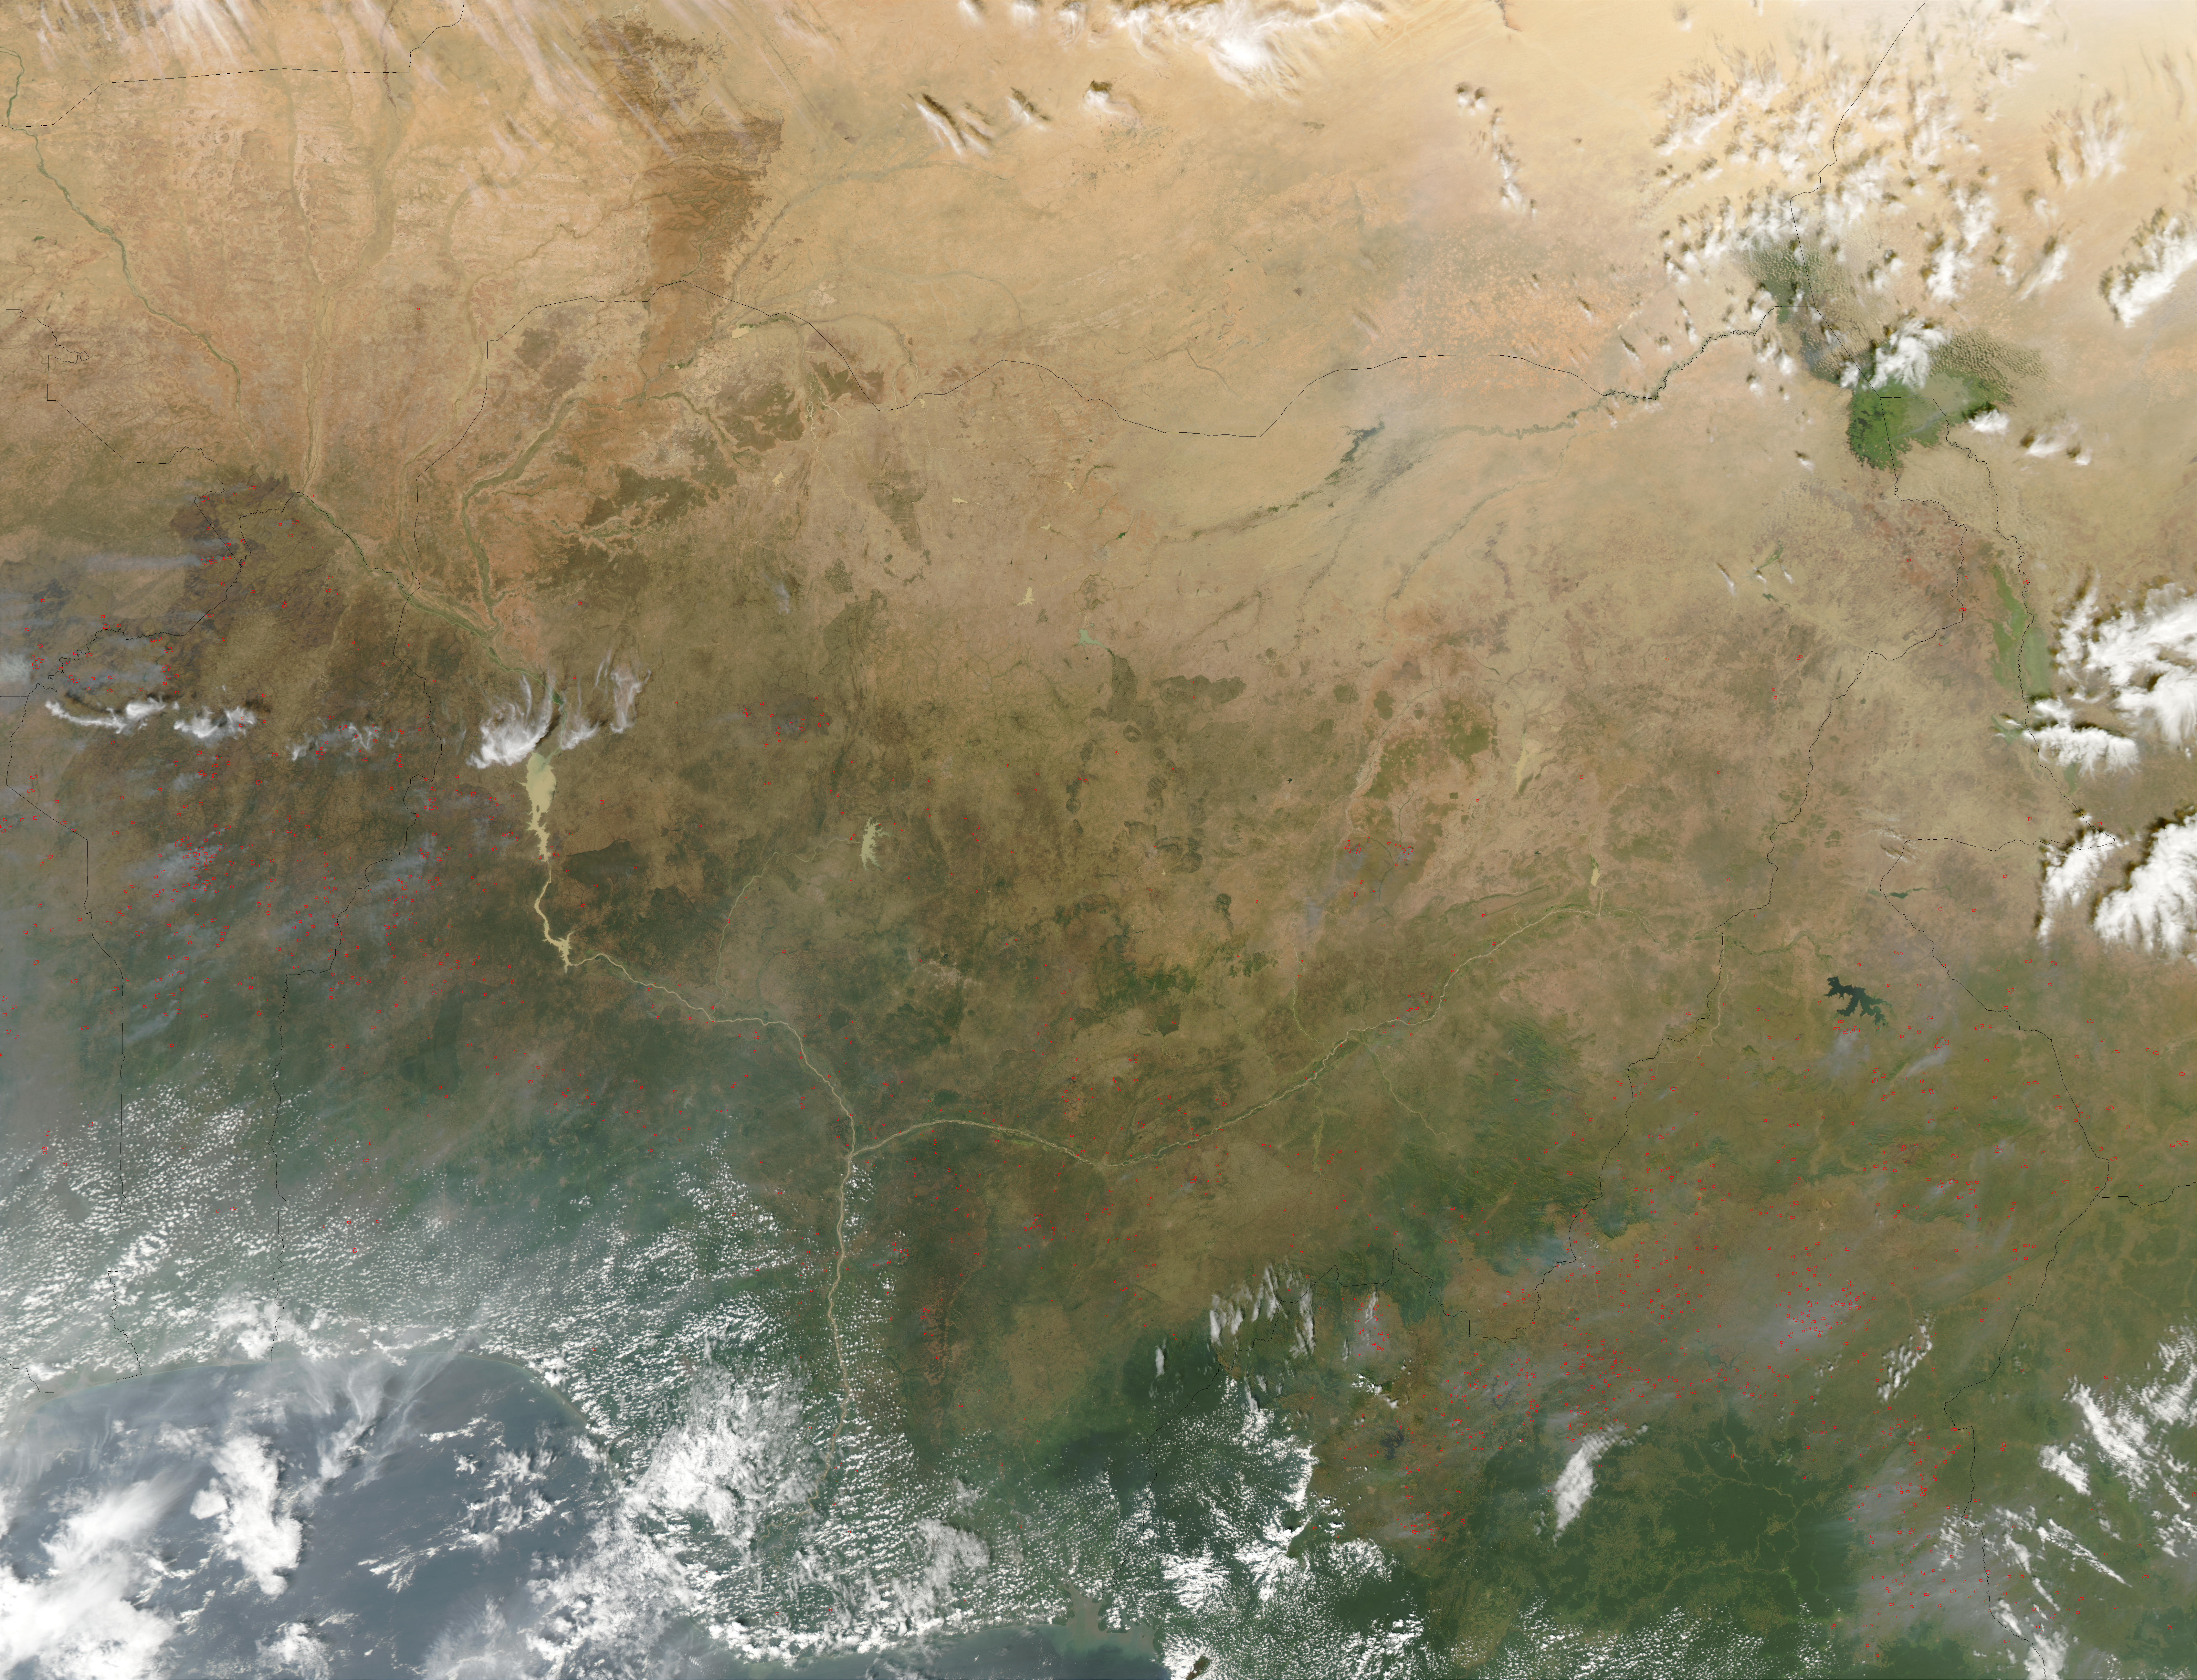 Widely Scattered Fires across Central Africa - related image preview